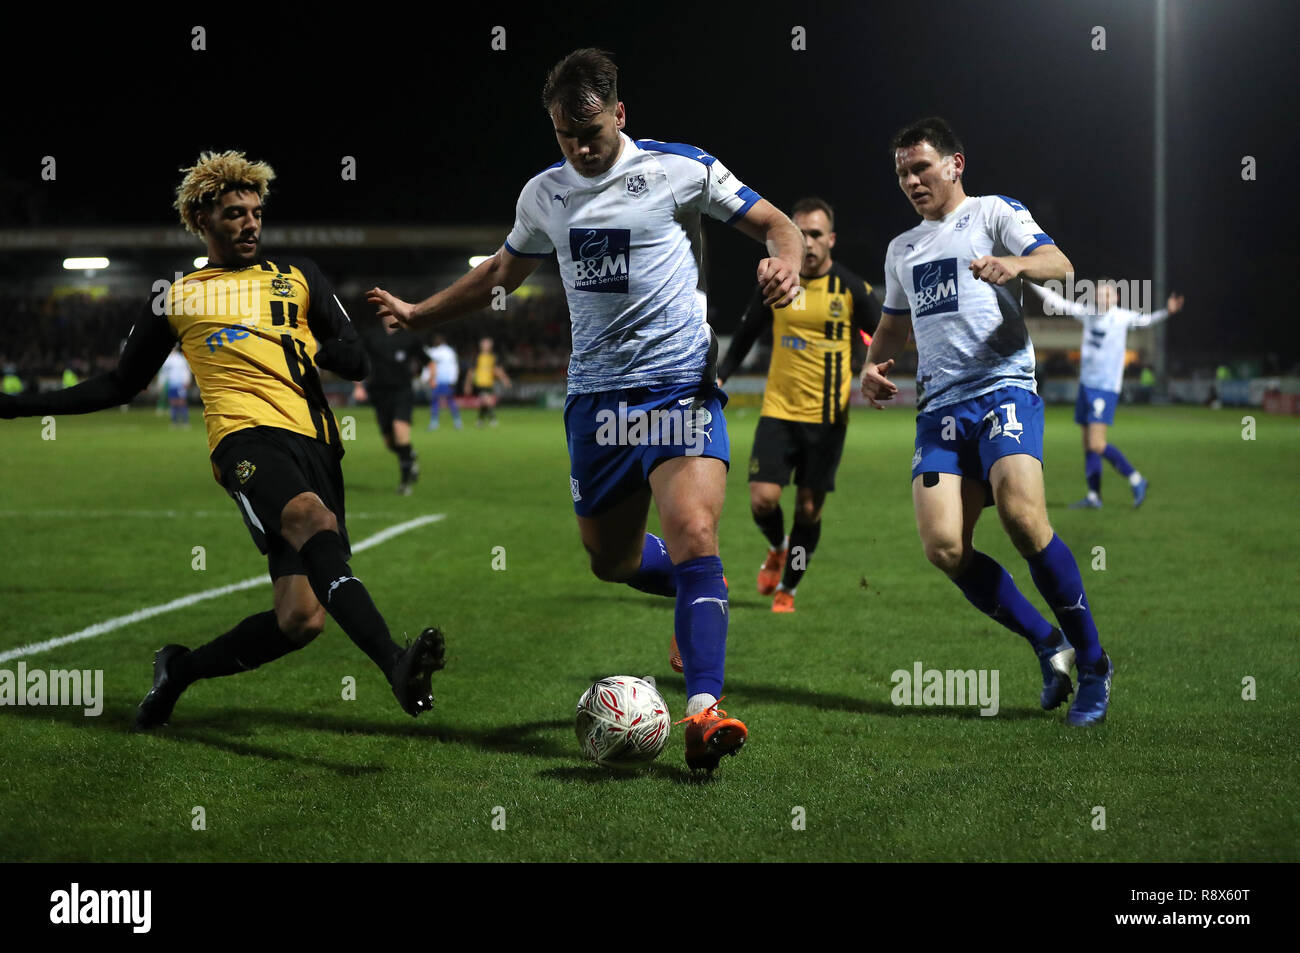 Southport's Devarn Green and Tranmere's Liam Ridehalgh battle for